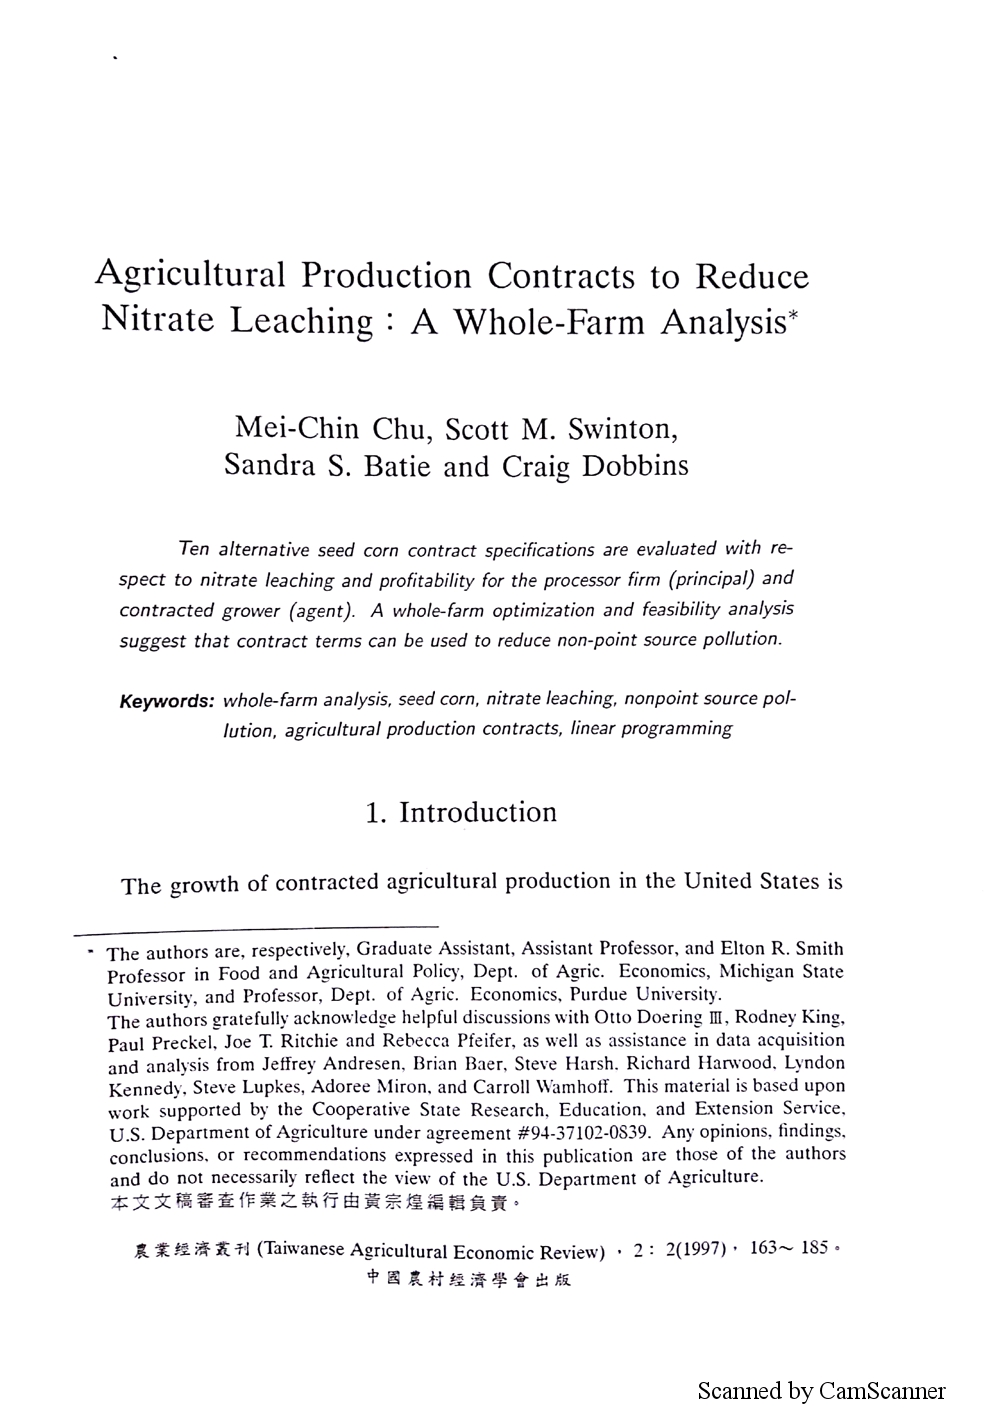 Agricultural_Production_Contracts_to_Reduce_Nitrate_Leaching.jpg